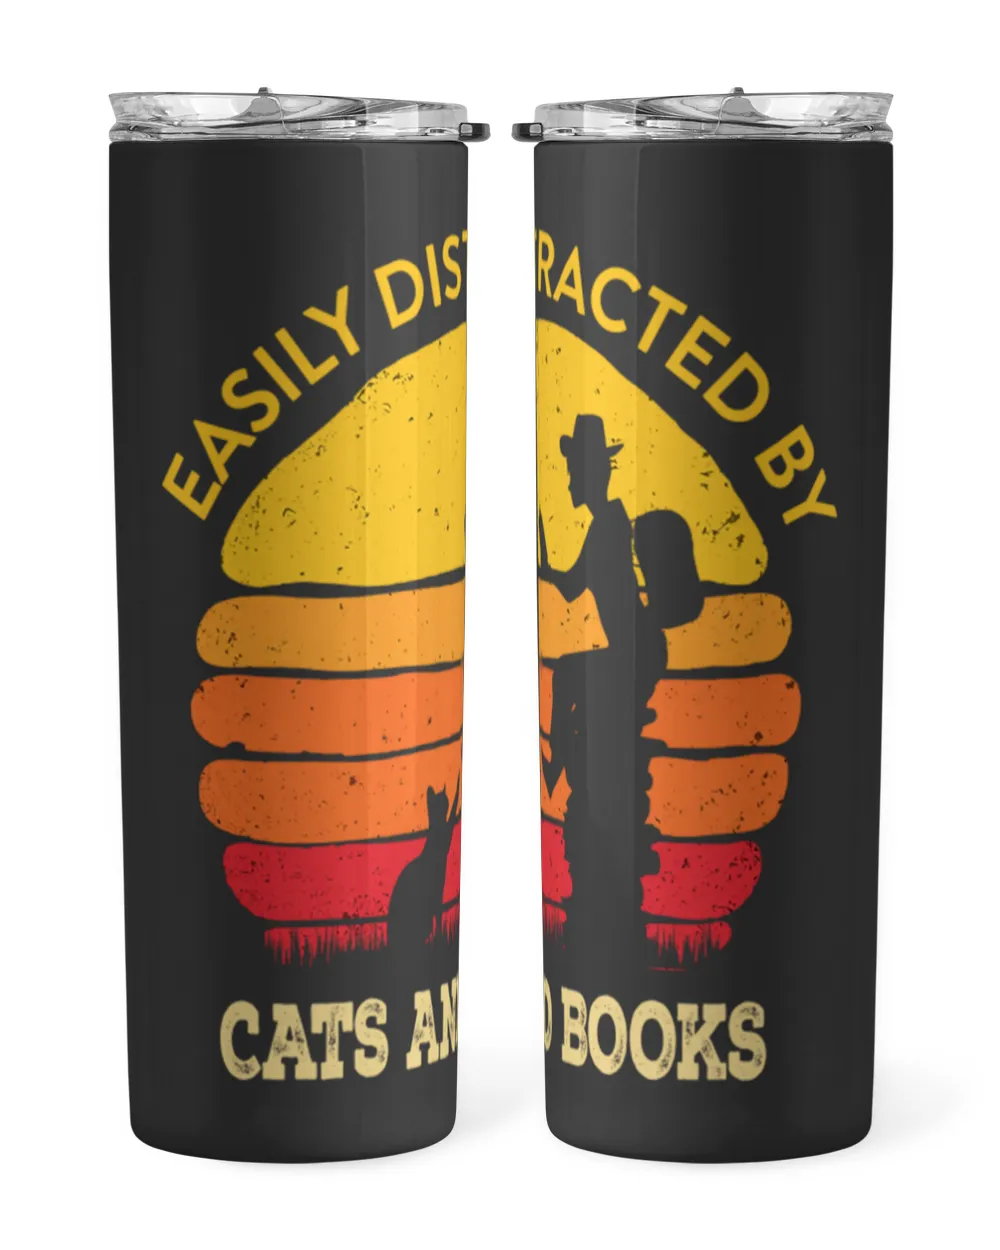 Cats And Books Cat and Book Shirt Gift Cats Lover Books Lover  masonschip